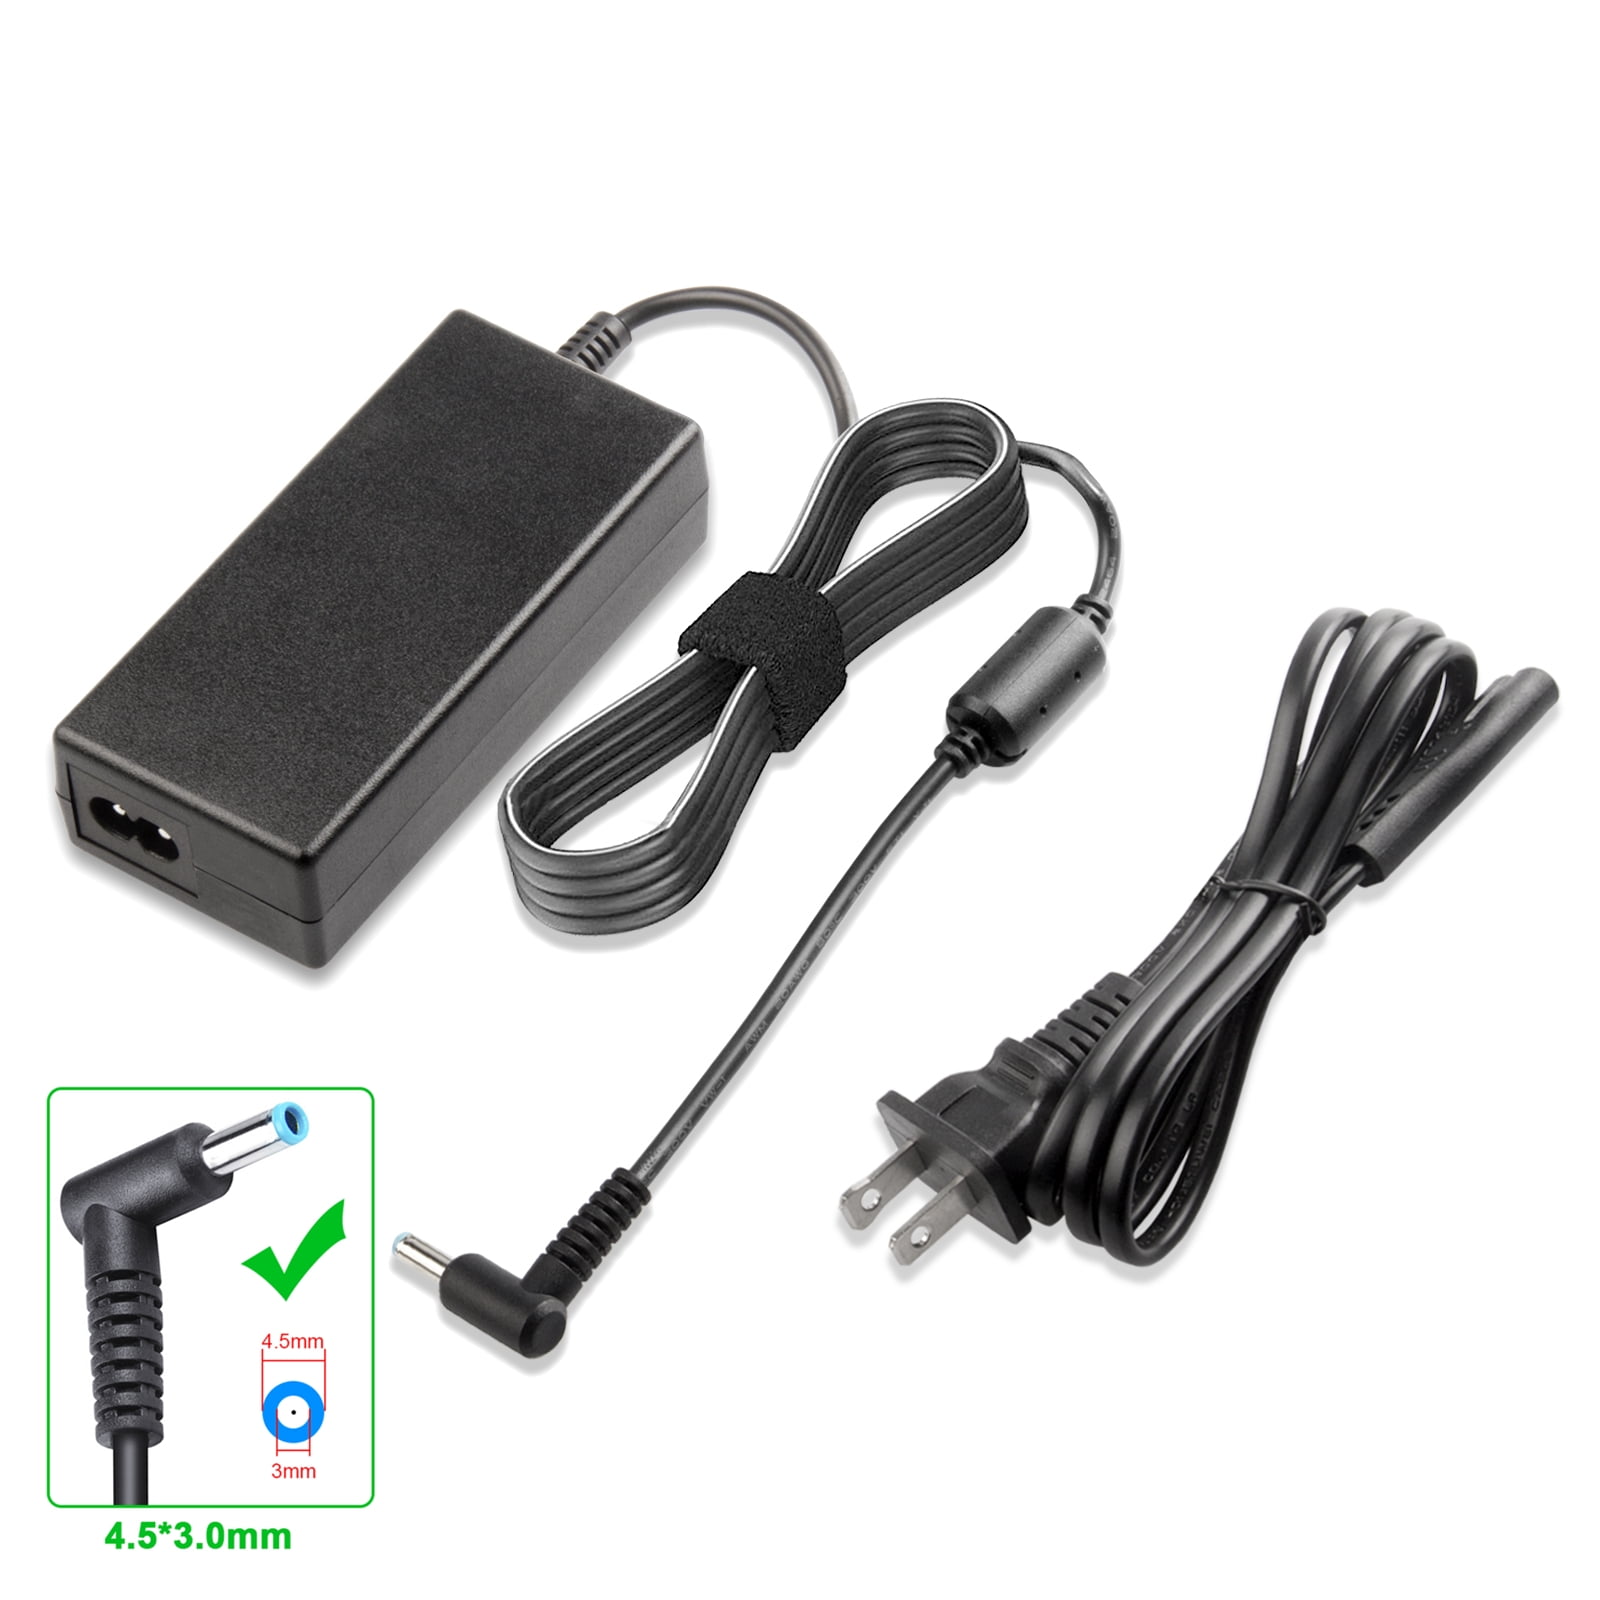 1 Adapter Notebook Charger For DC7.4*5.0/7.9*5.5/4.5*3.0 Laptop